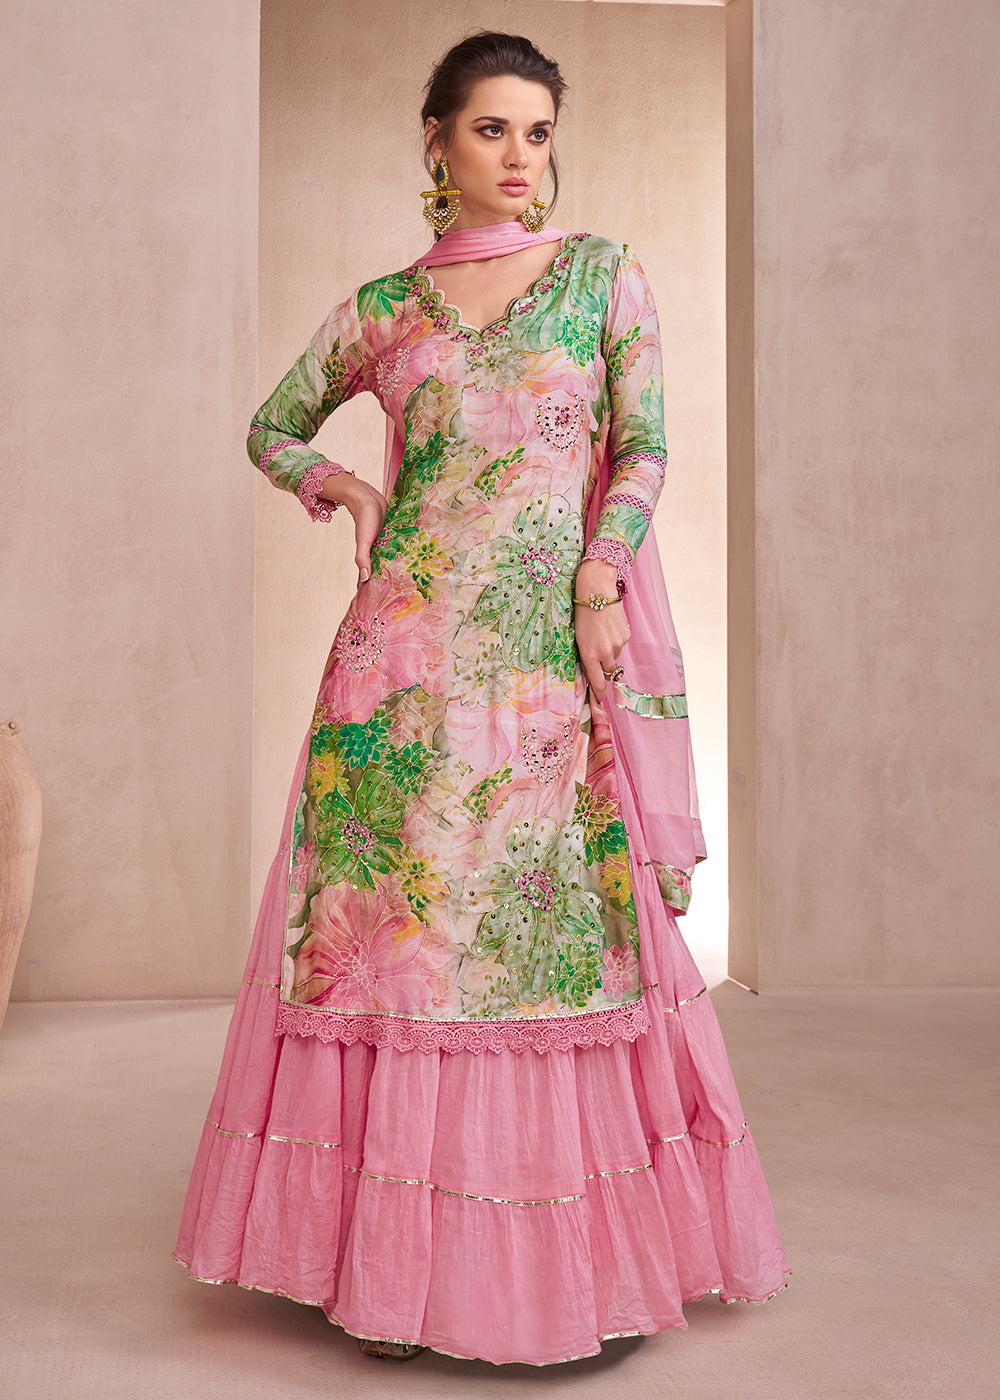 Buy Now Rose Pink Pure Muslin Embroidered Lehenga Skirt Suit Online in USA, UK, Canada, Germany, Australia & Worldwide at Empress Clothing. 